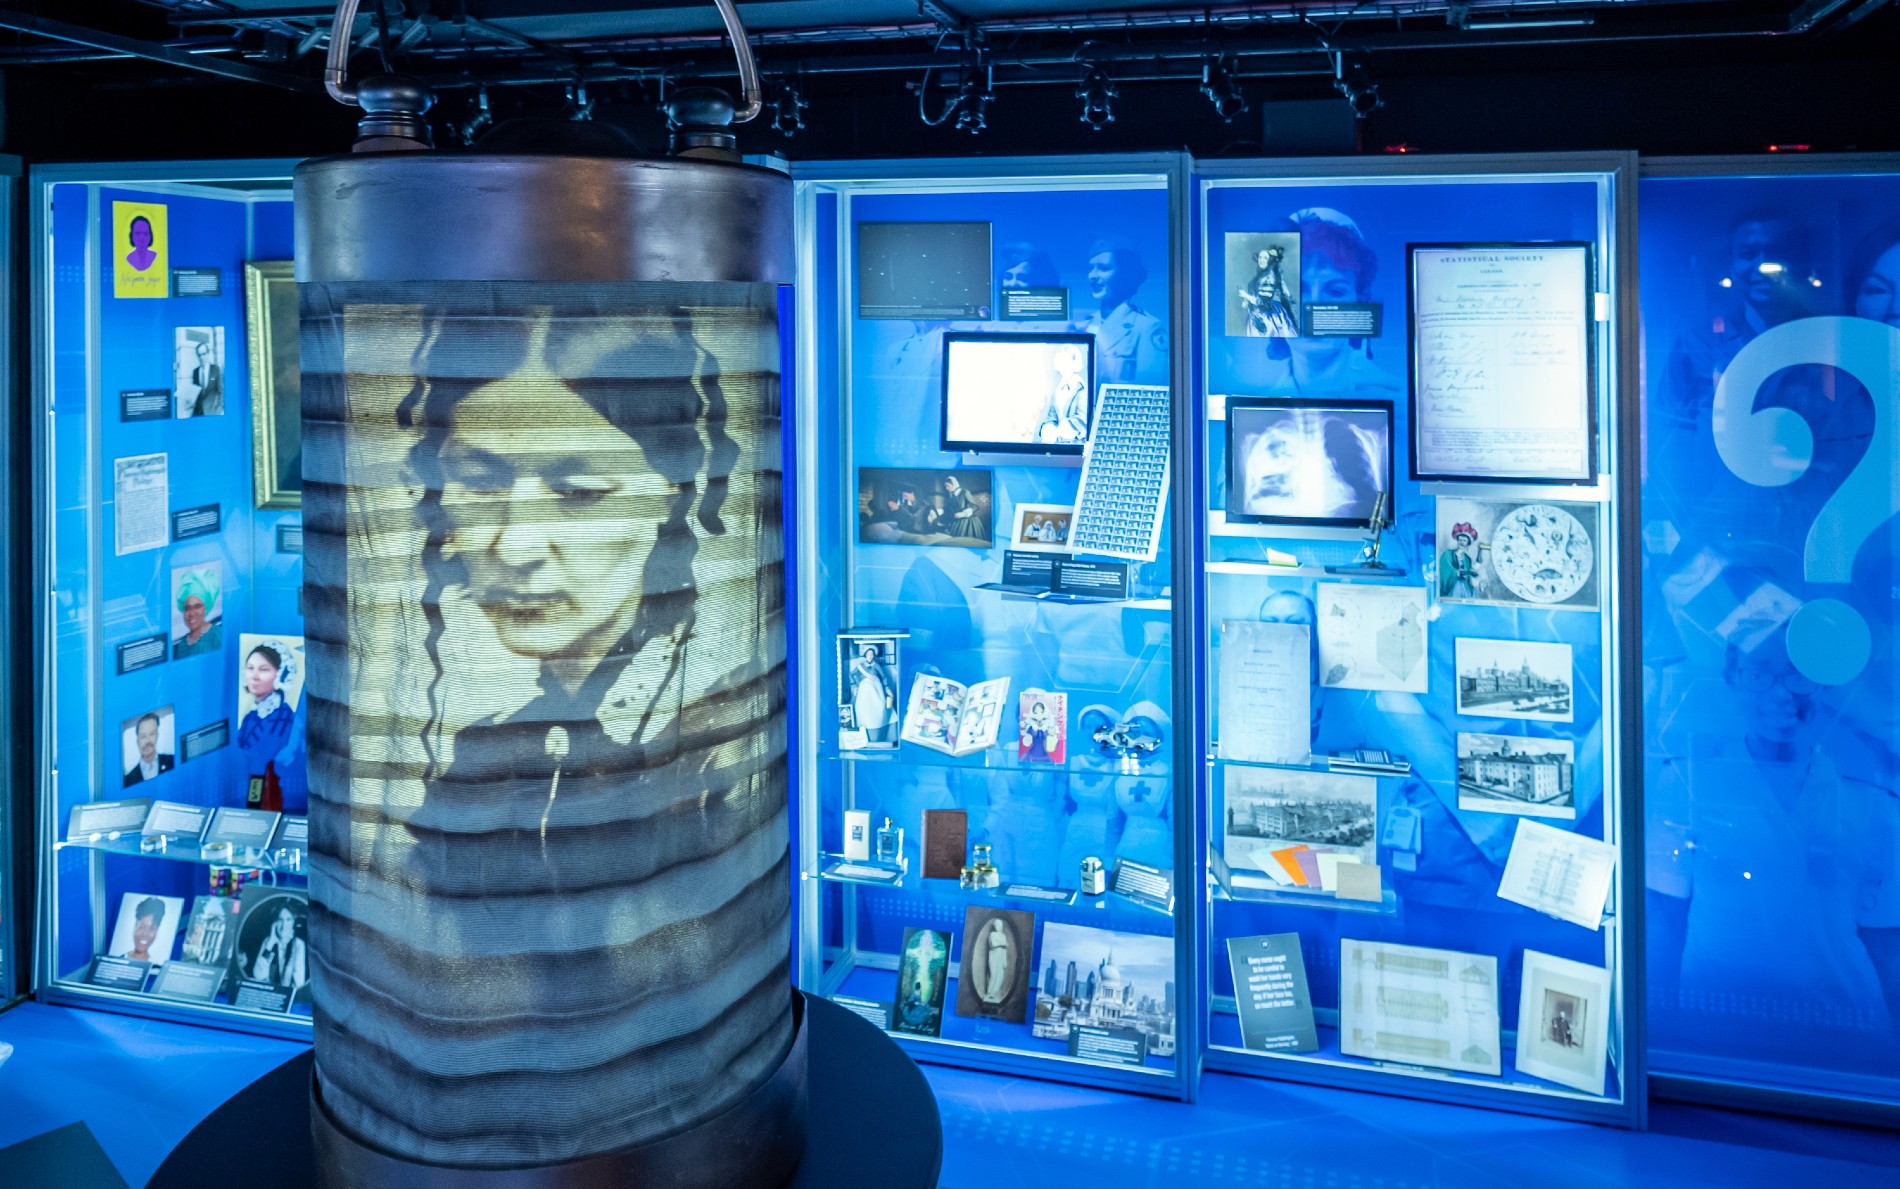 A scene from the bicentenary exhibition at the Florence Nightingale Museum in London